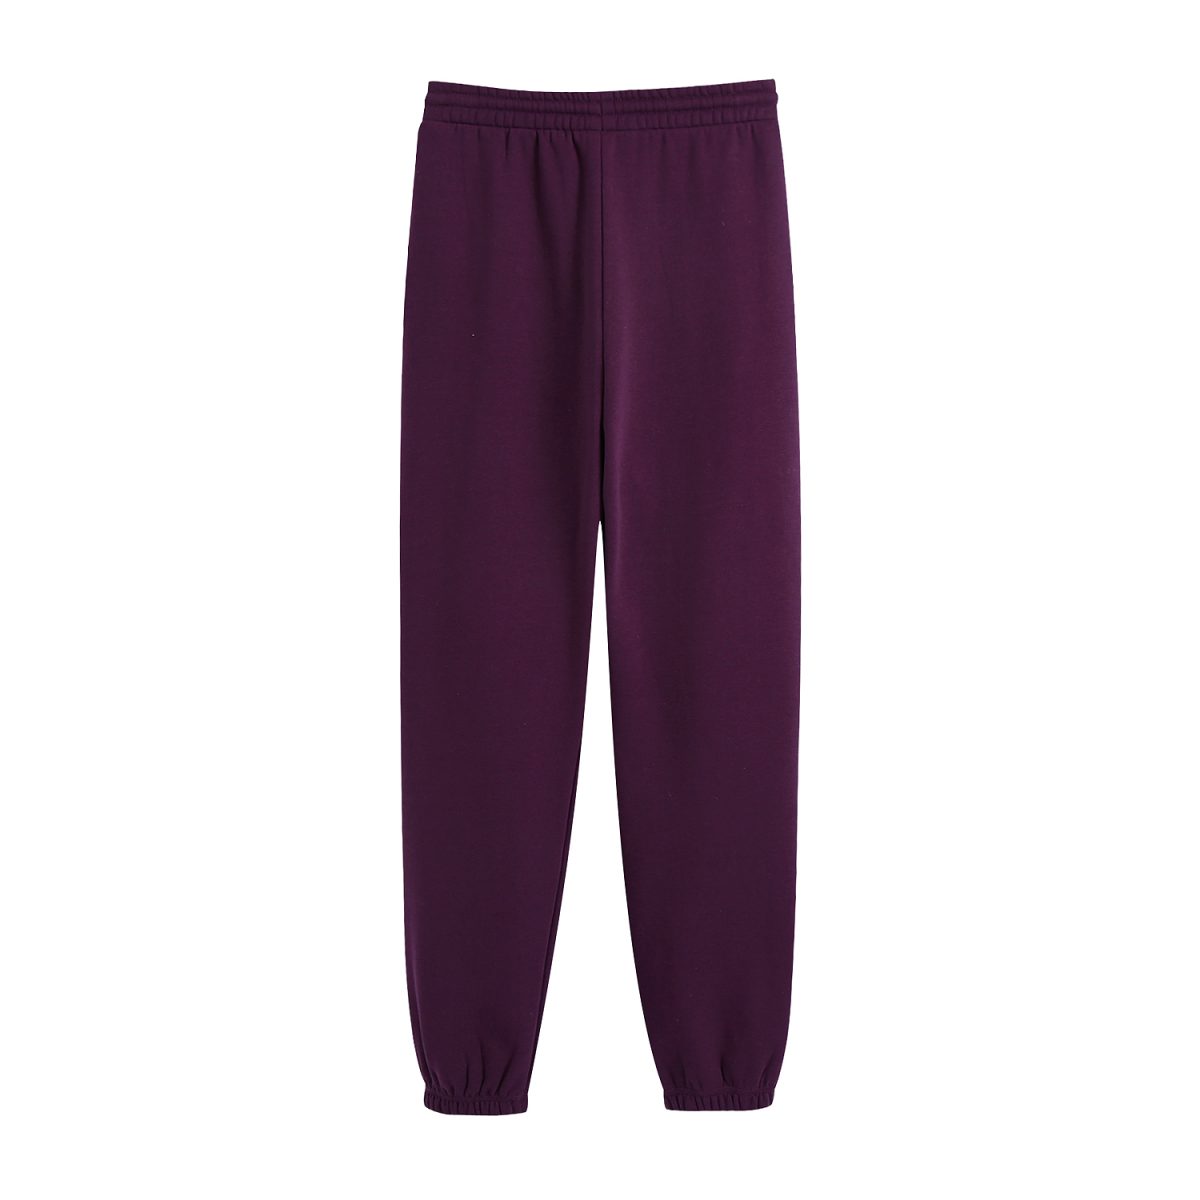 Purple Thick Pure Cotton Looped Fabric Elastic Waist Drawstring Knit Pants in Pants